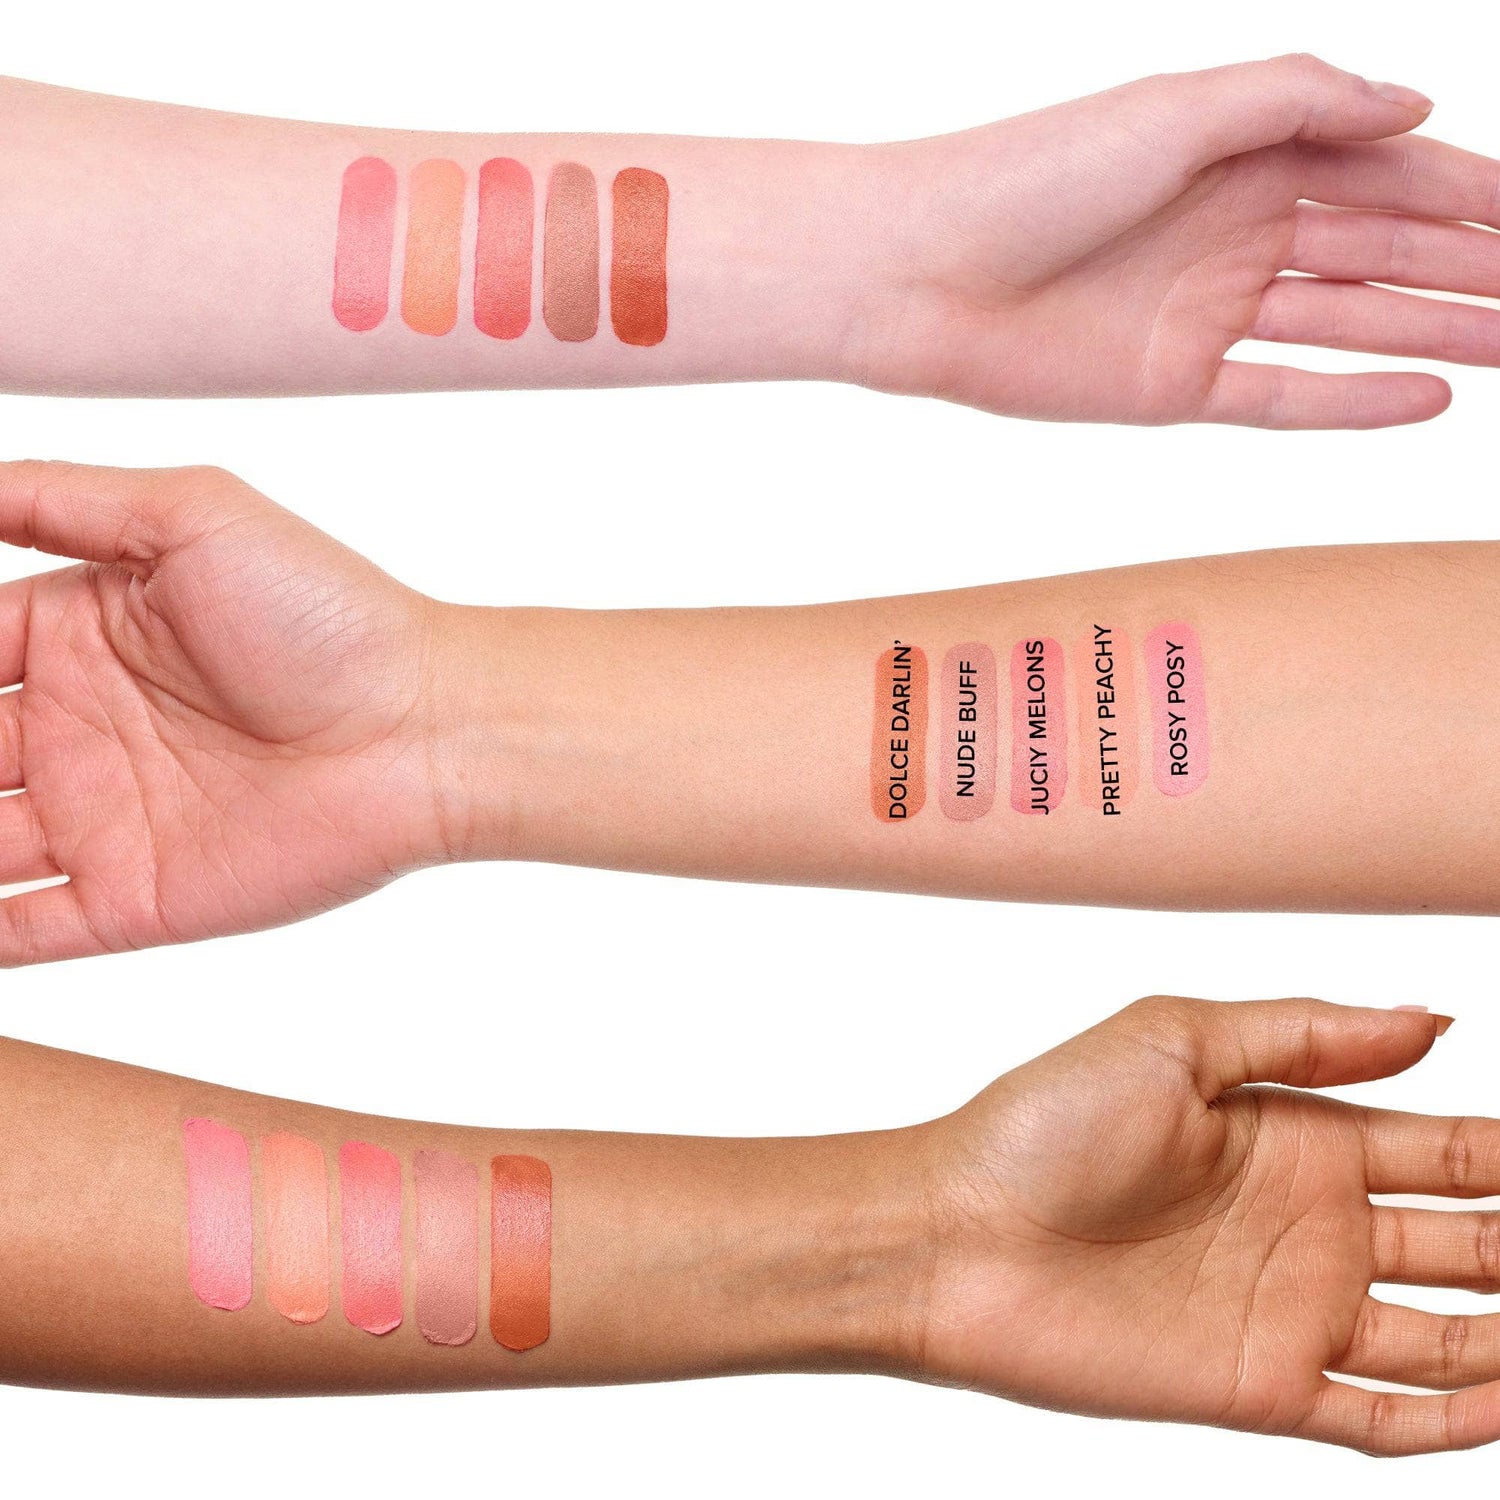 Arms in different skin tones with Nudies Matte Lux Dolce Darlin' swatch